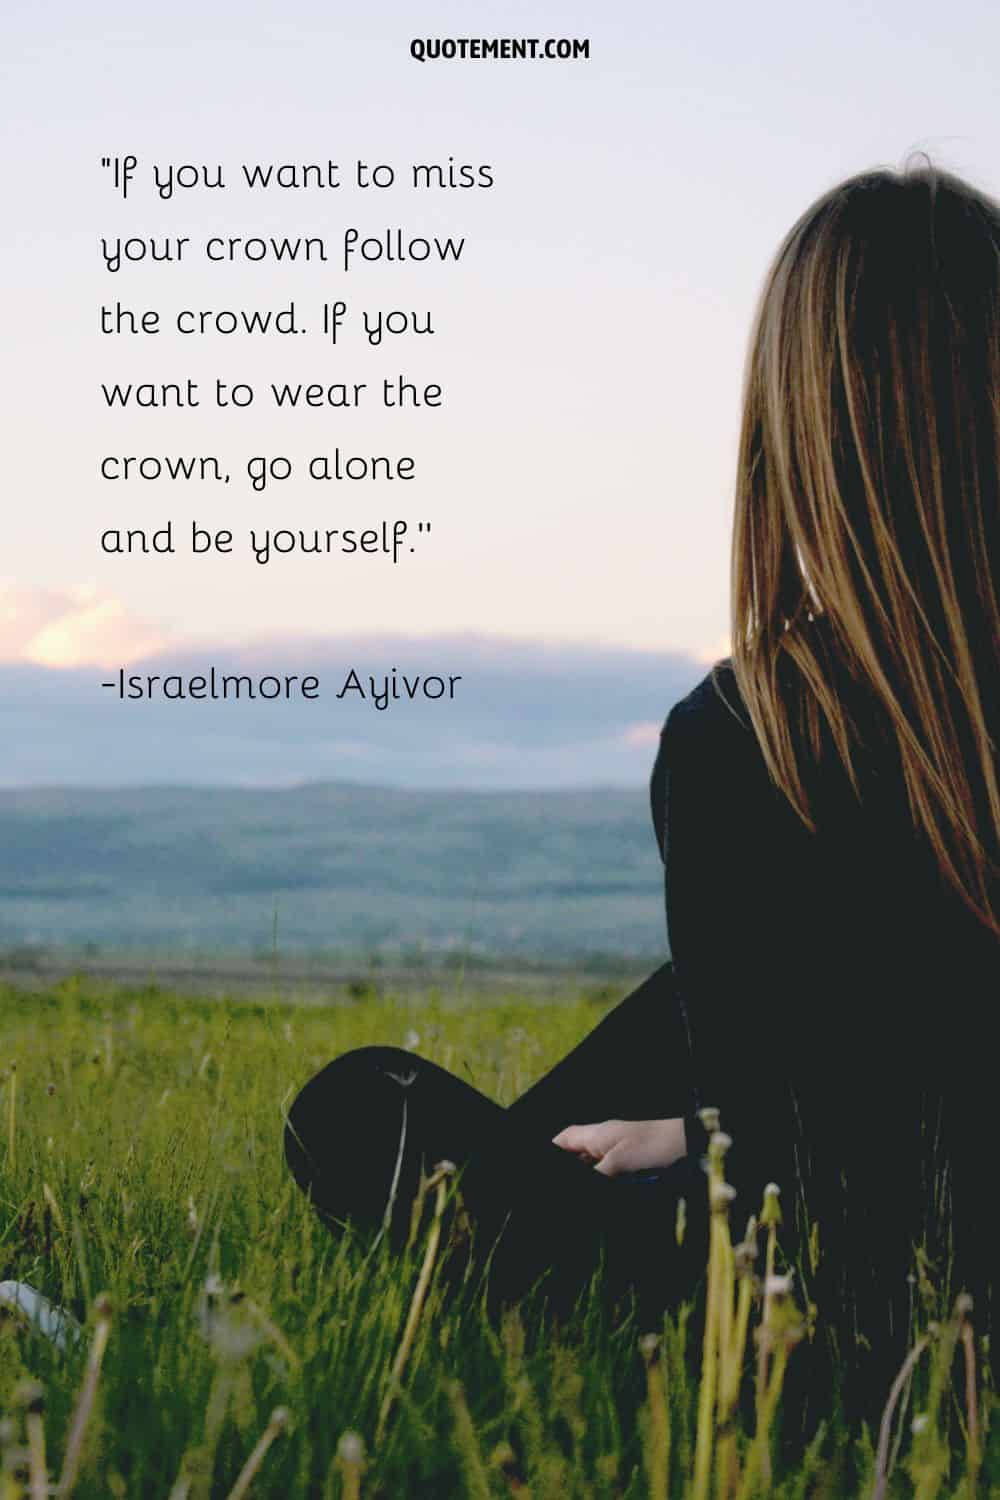 a girl in black sitting on the grass representing being alone inspirational quote
